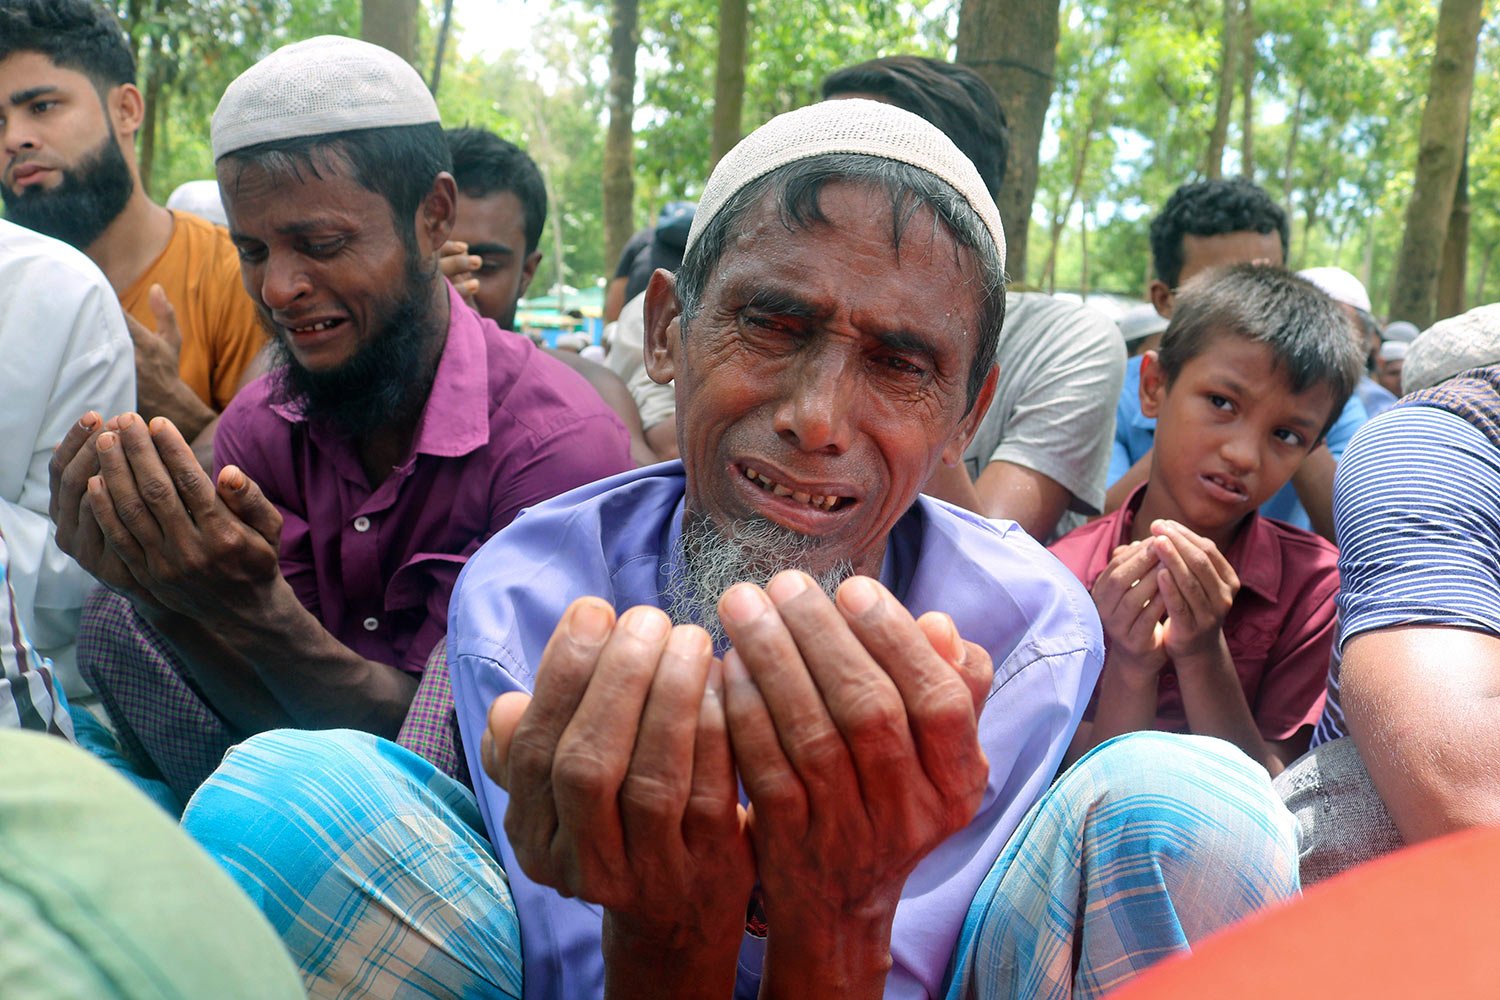  Rohingya refugees cry while praying during a gathering to mark the fifth anniversary of their exodus from Myanmar to Bangladesh, at a Kutupalong Rohingya refugee camp at Ukhiya in Cox's Bazar district, Bangladesh, Thursday, Aug. 25, 2022. (AP Photo/